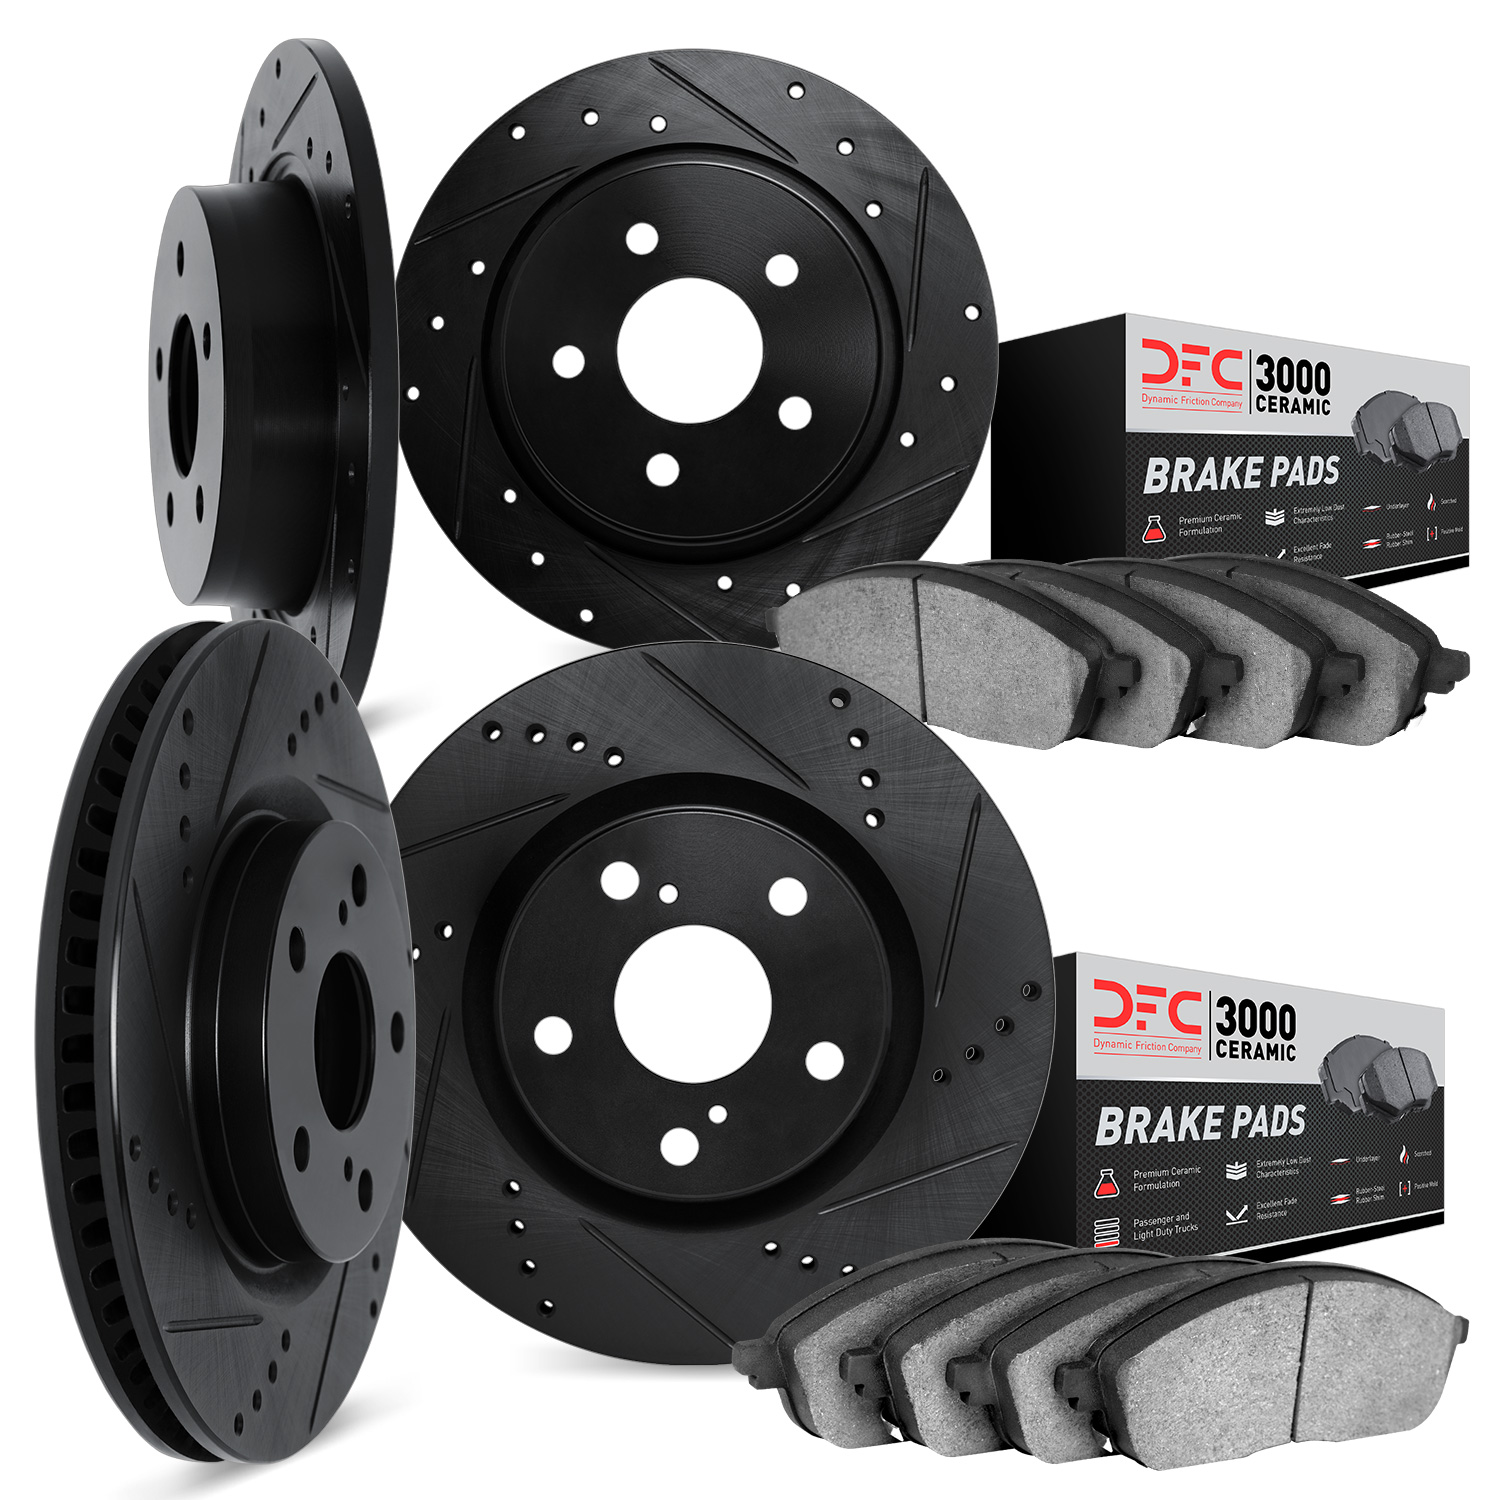 8304-53002 Drilled/Slotted Brake Rotors with 3000-Series Ceramic Brake Pads Kit [Black], 2004-2012 GM, Position: Front and Rear